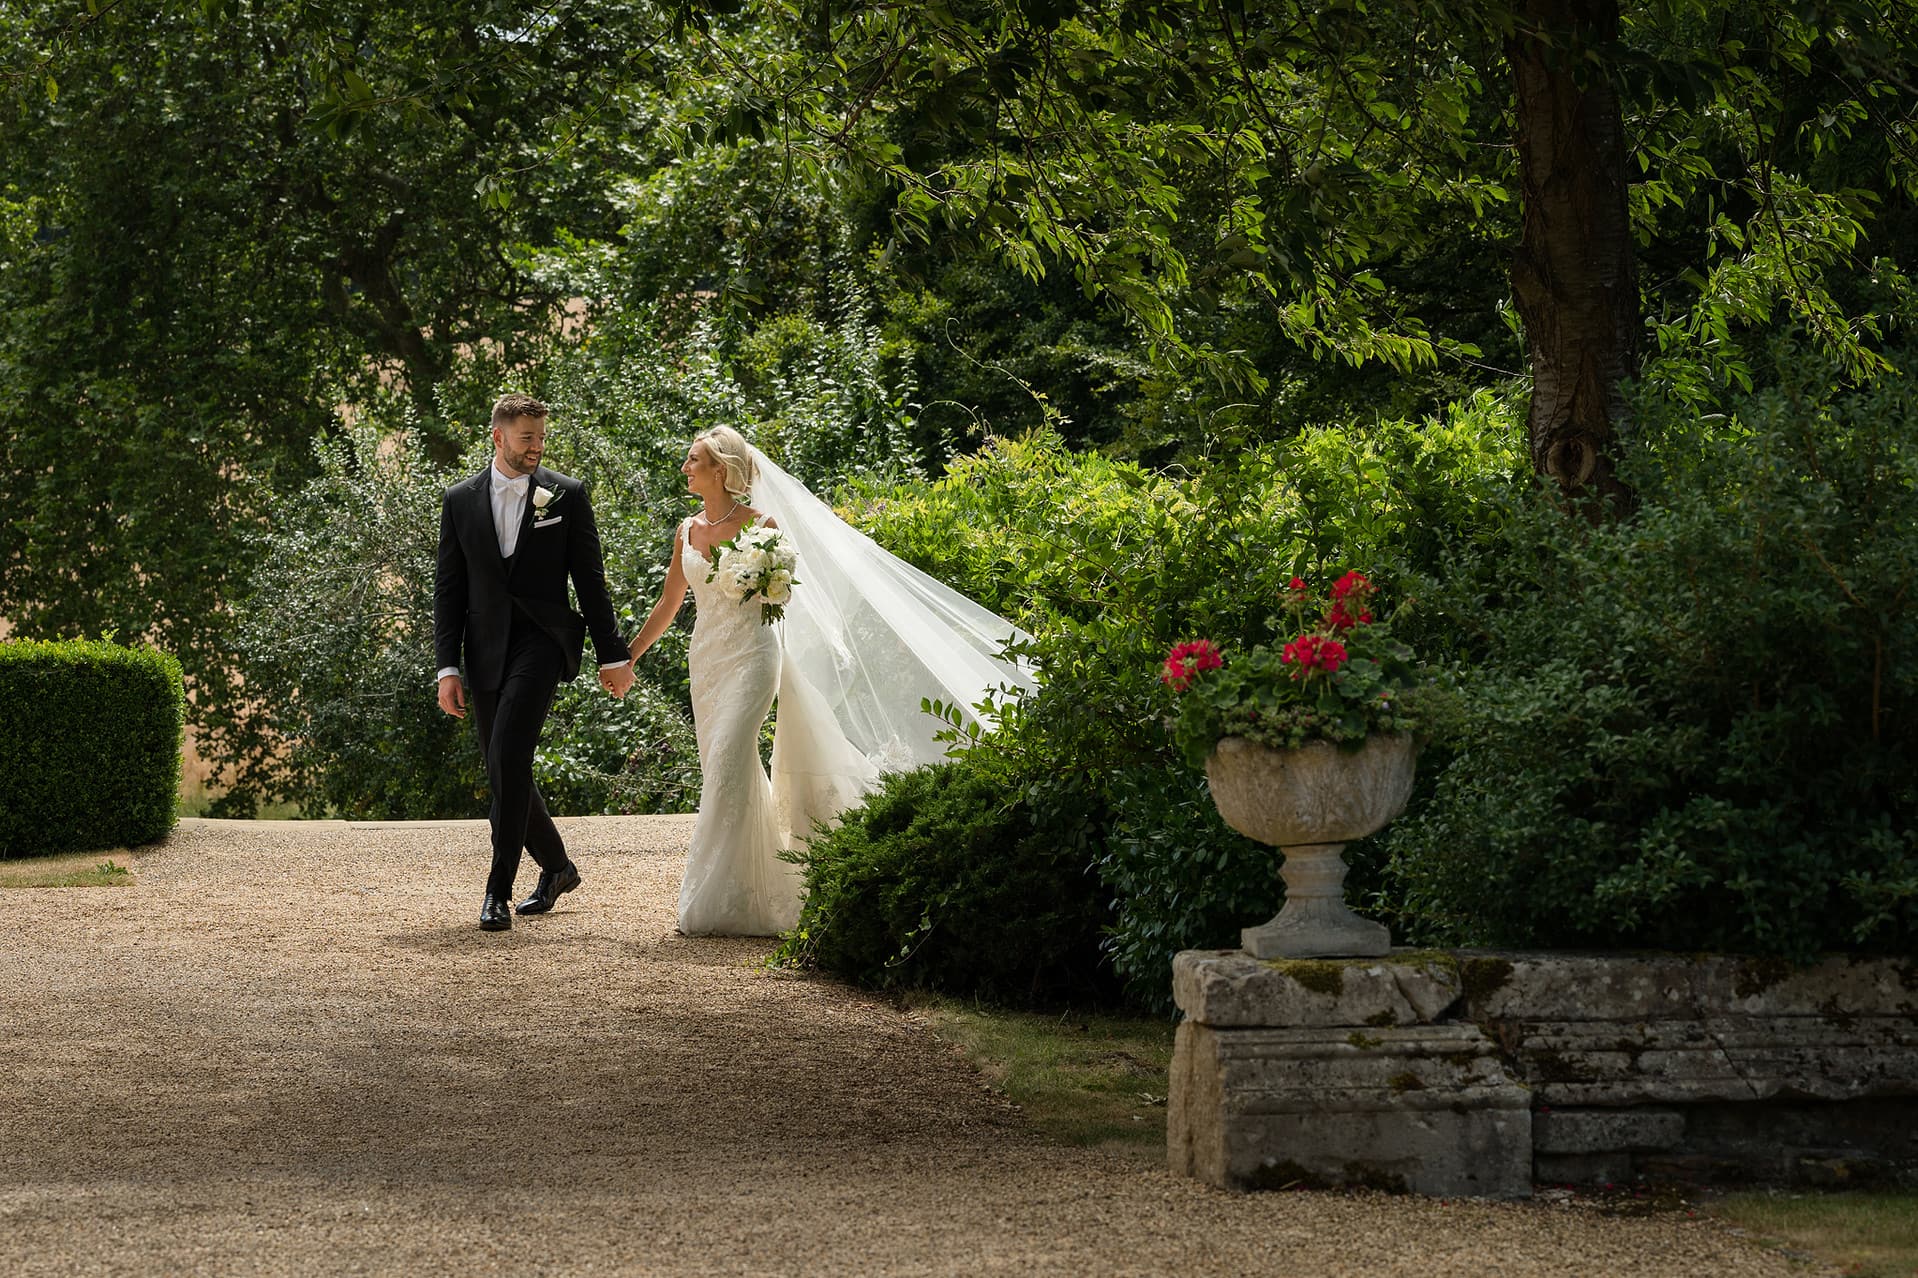 Bride and groom walking hand-in-hand through grounds of wedding venue